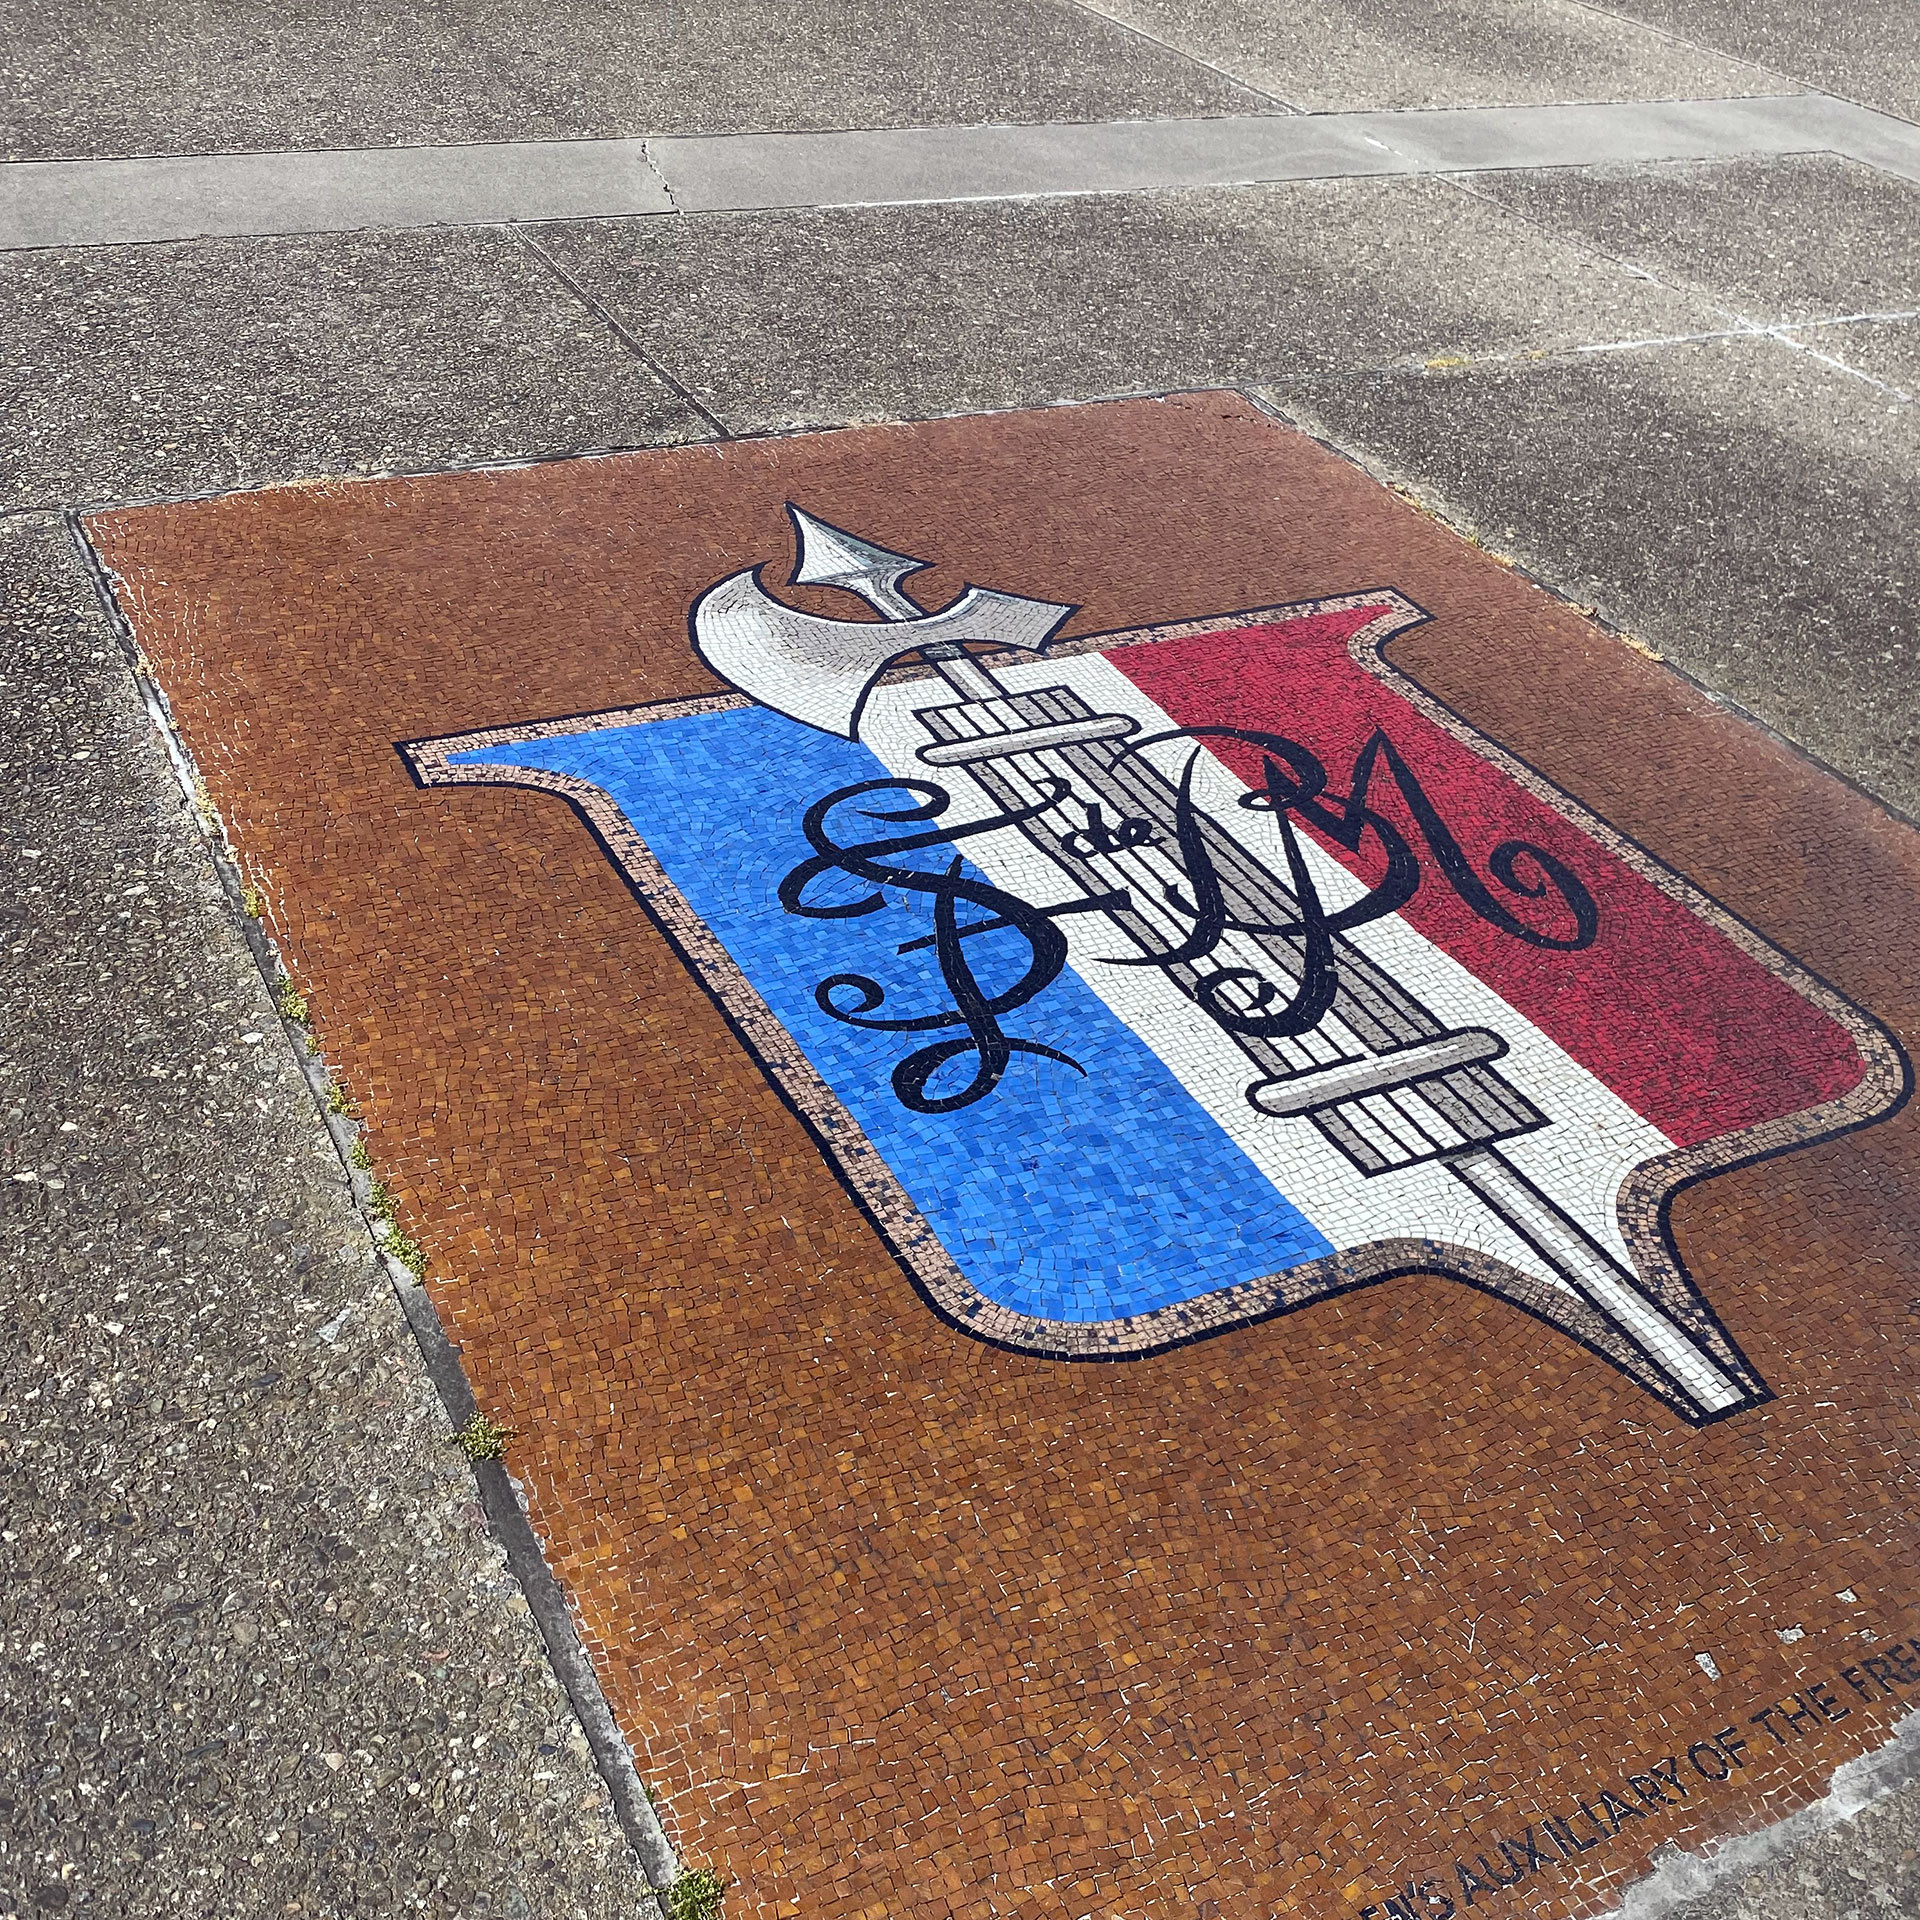 A mosaic is inlaid in the ground showing a blue, white and red crest depicting a syringe